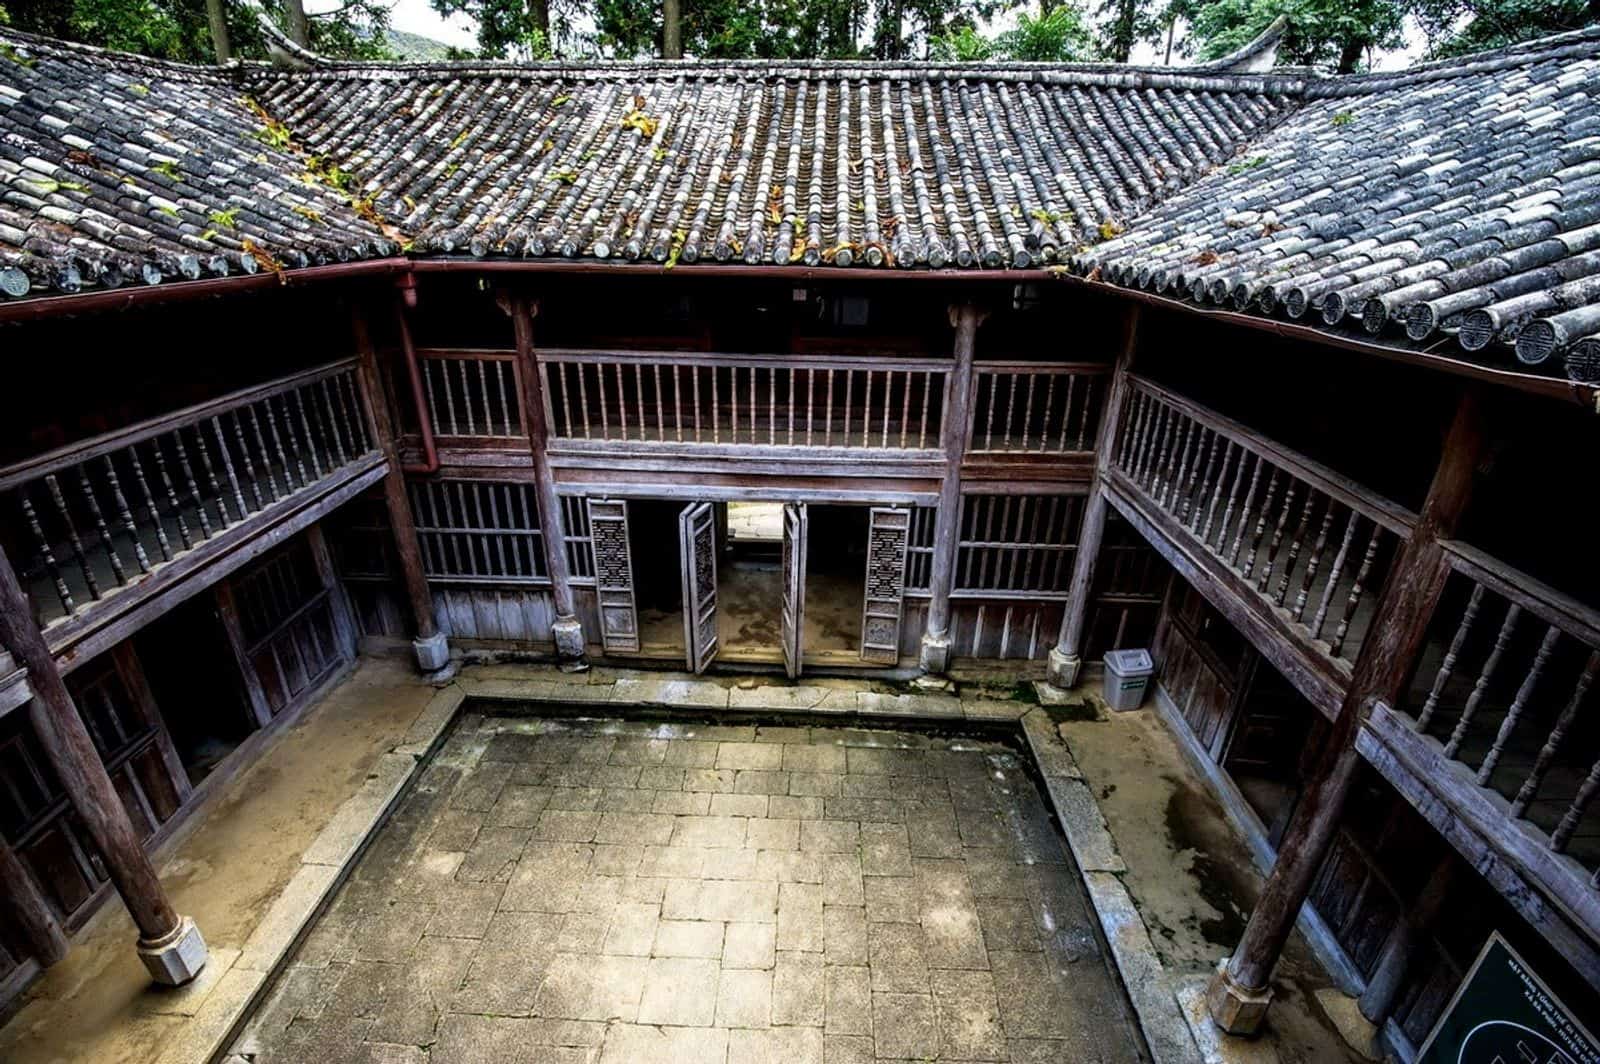 The king meo mansion